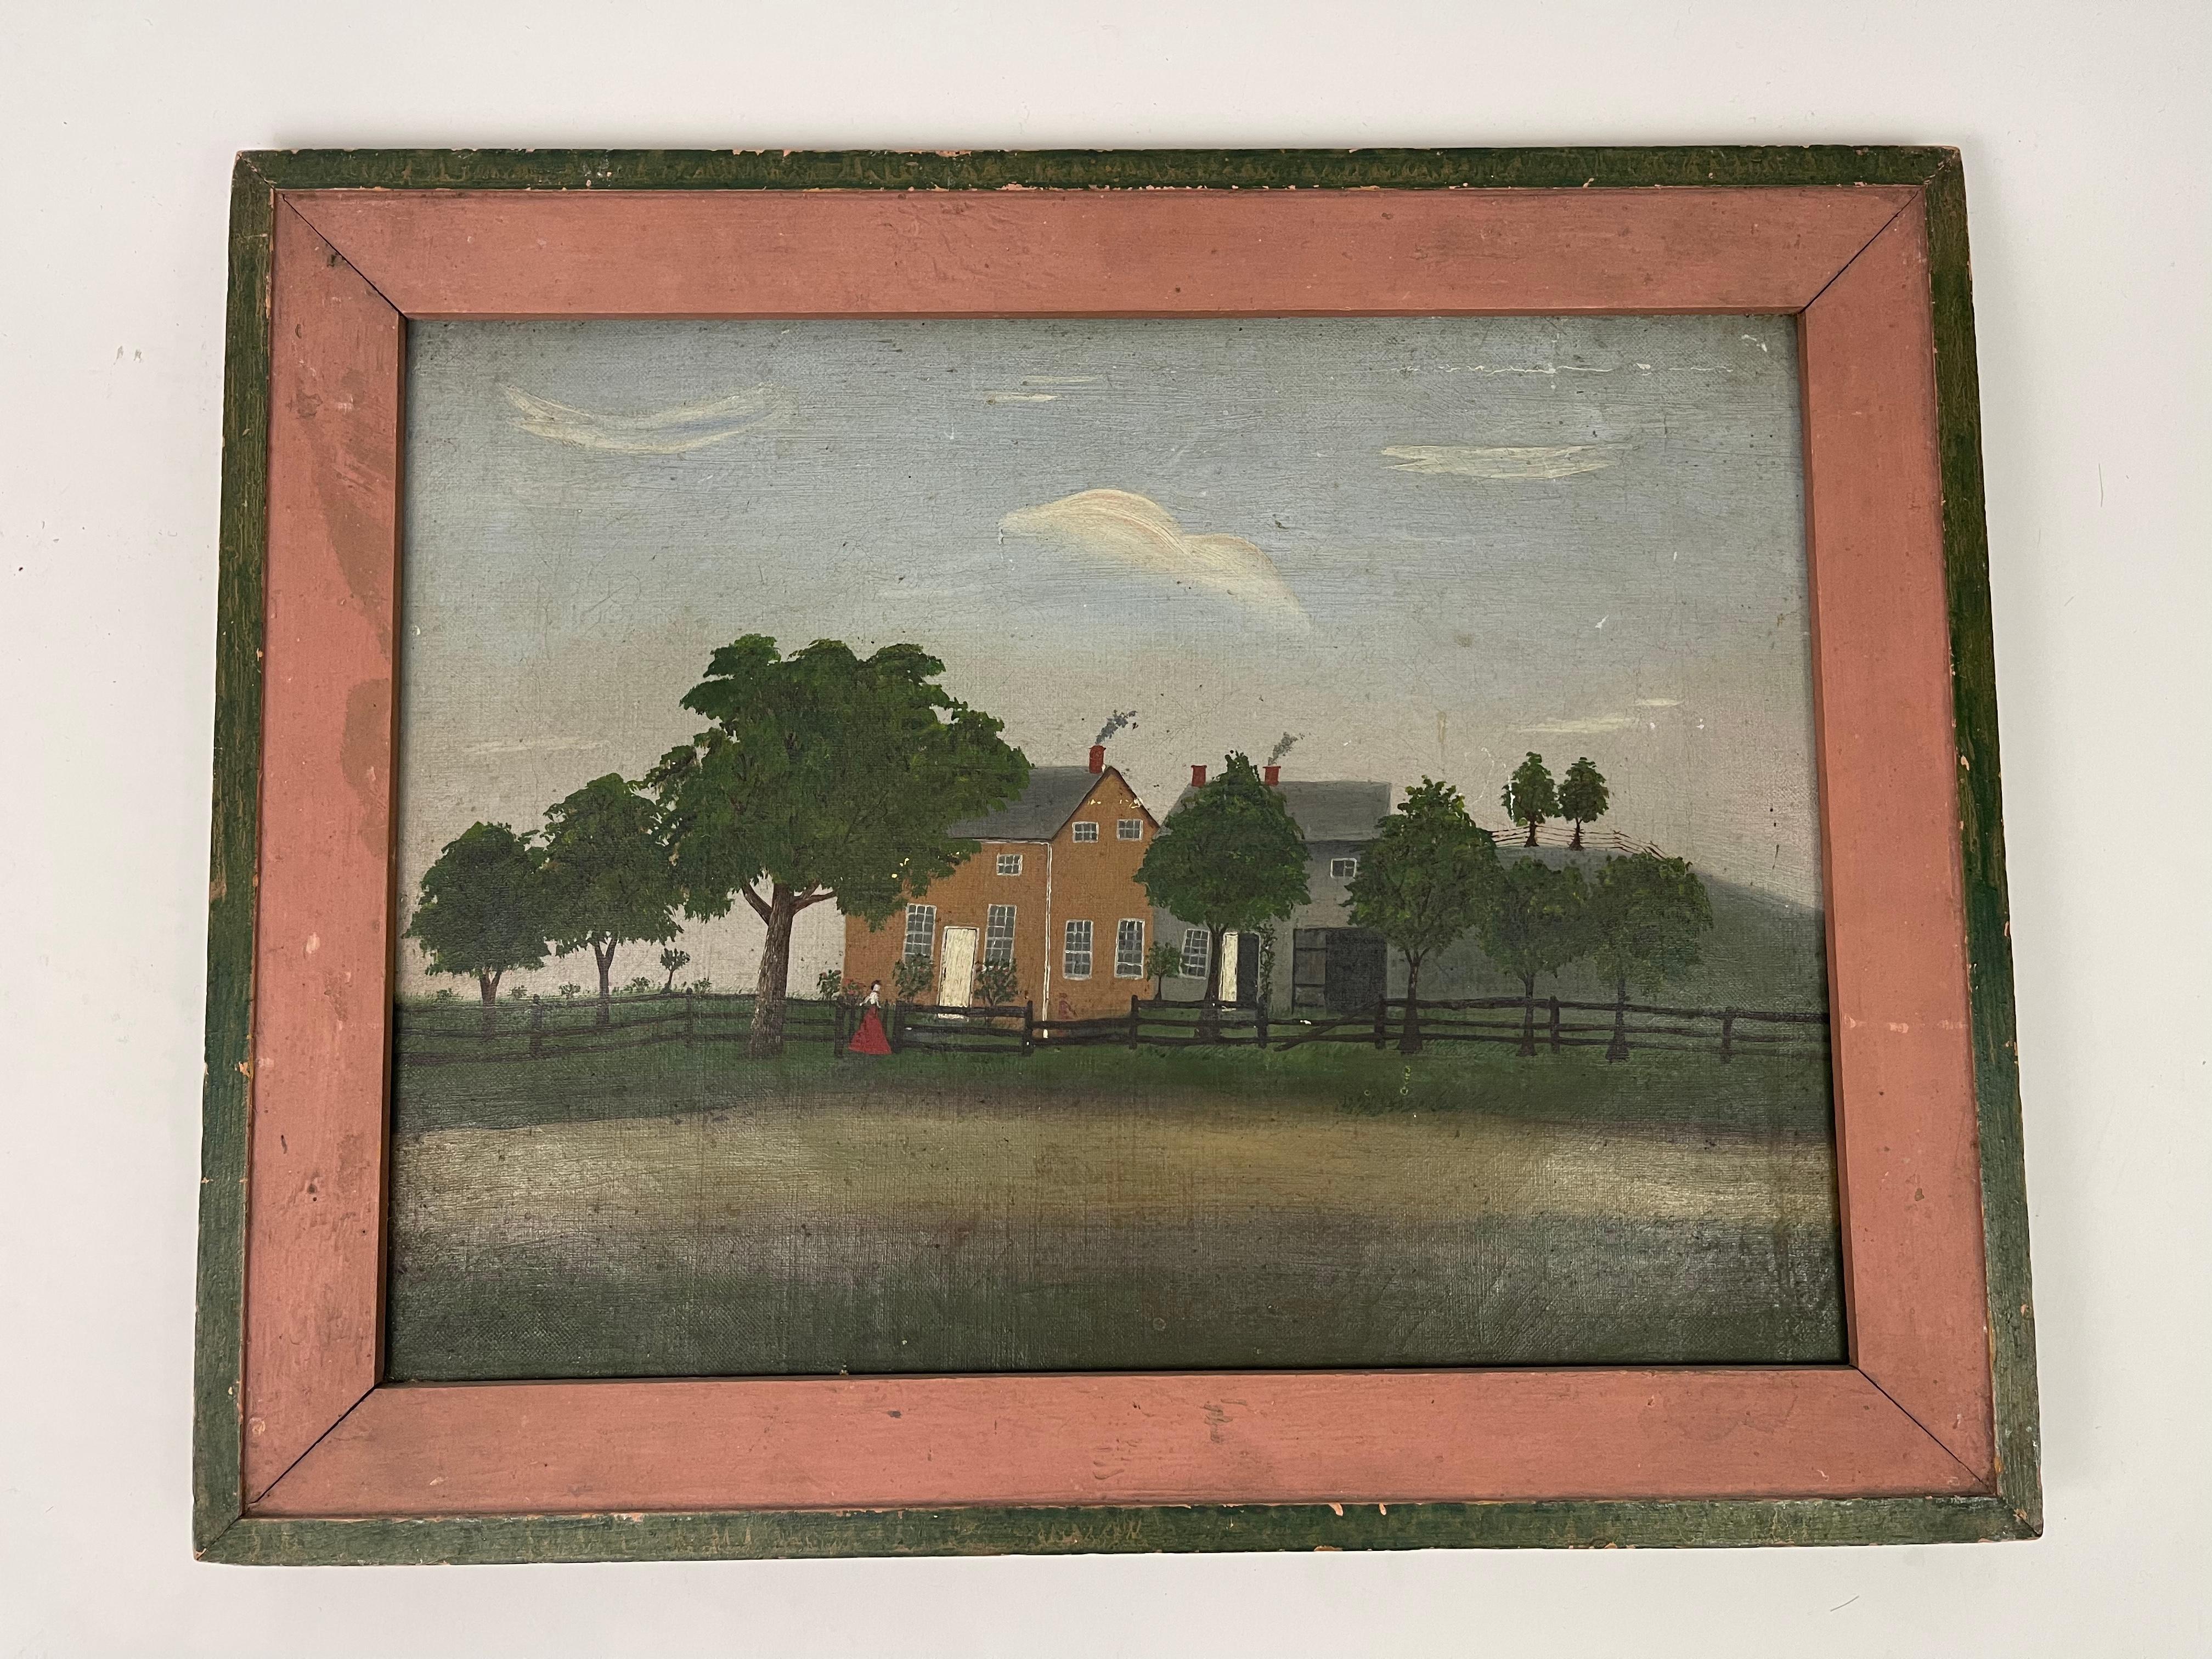 A charming 19th century oil on canvas American folk art portrait painitng of a farmhouse, in an early, if not original, salmon pink and green painted wood frame. The mustard yellow farmhouse with white door has a grey barn attached. There is smoke